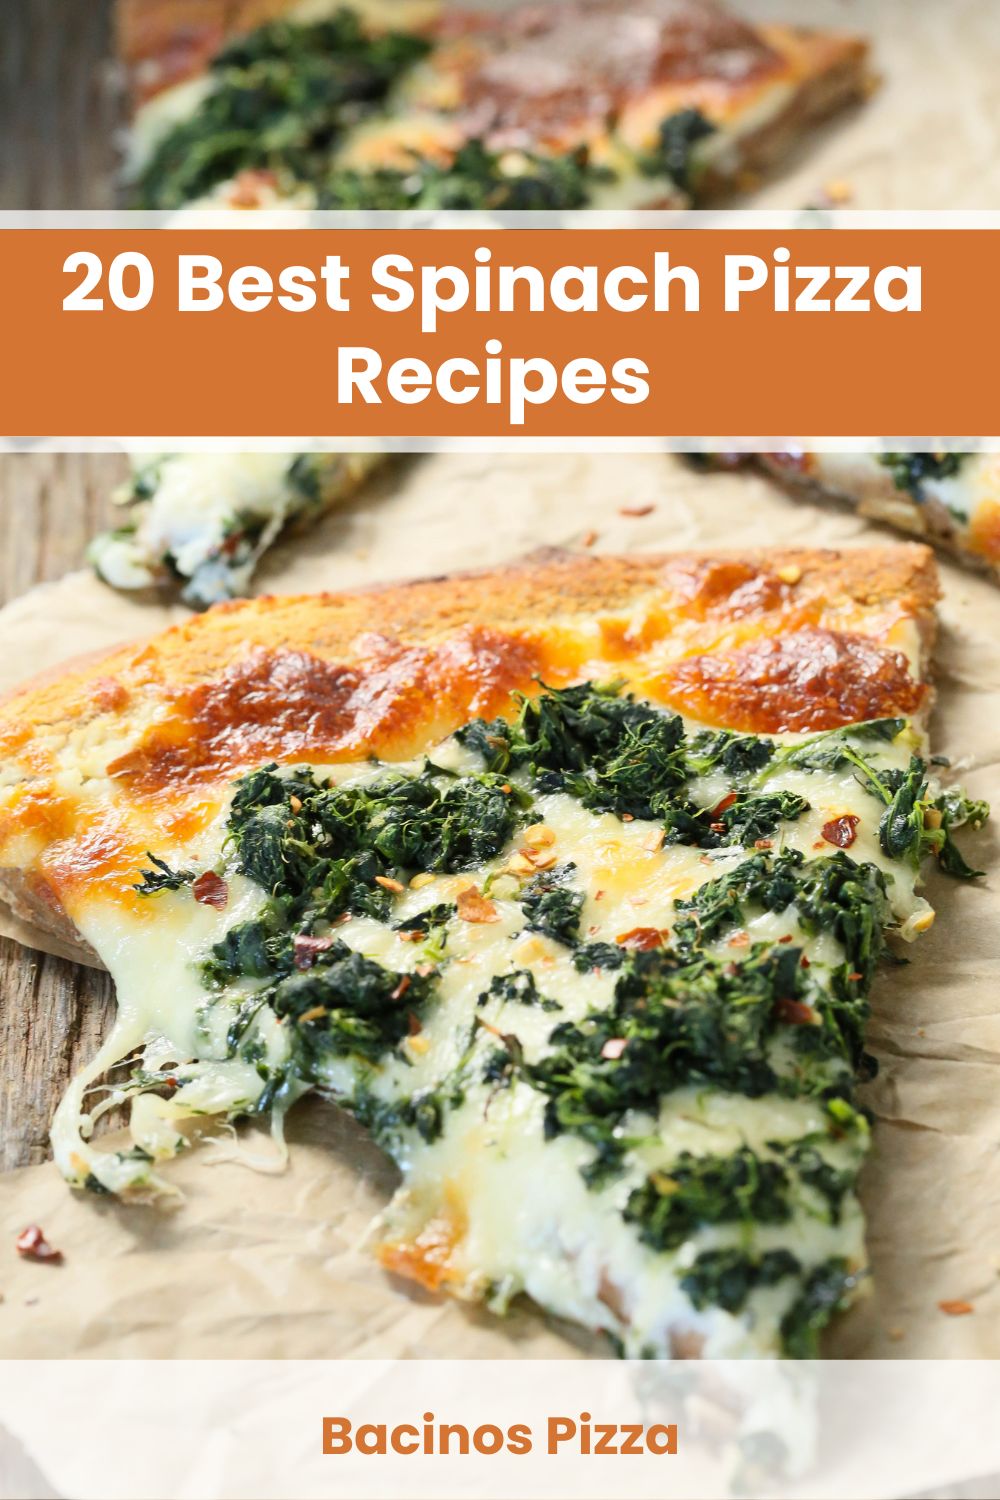 Best Spinach Pizza Recipes